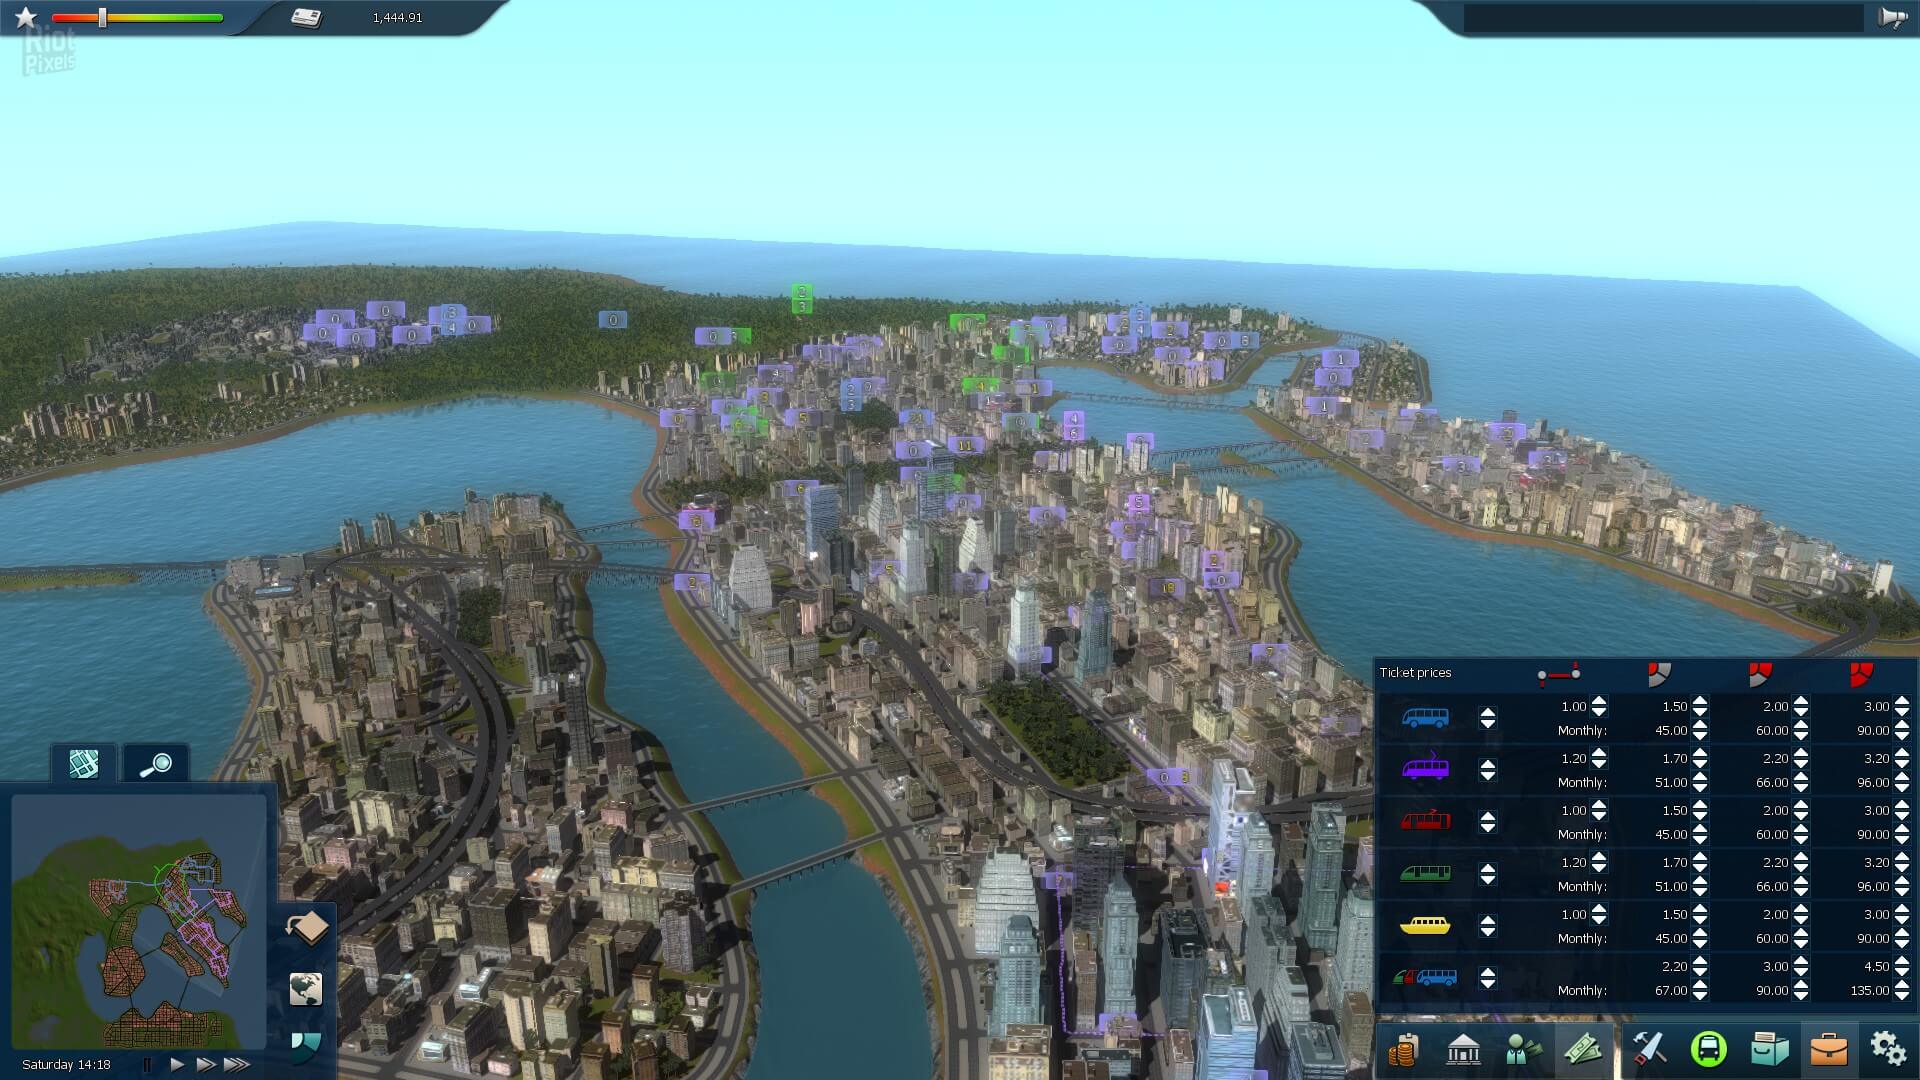 Download Cities in Motion 2 Highly Compressed Full Game in 480 MB Only !! - TraX Gaming Center